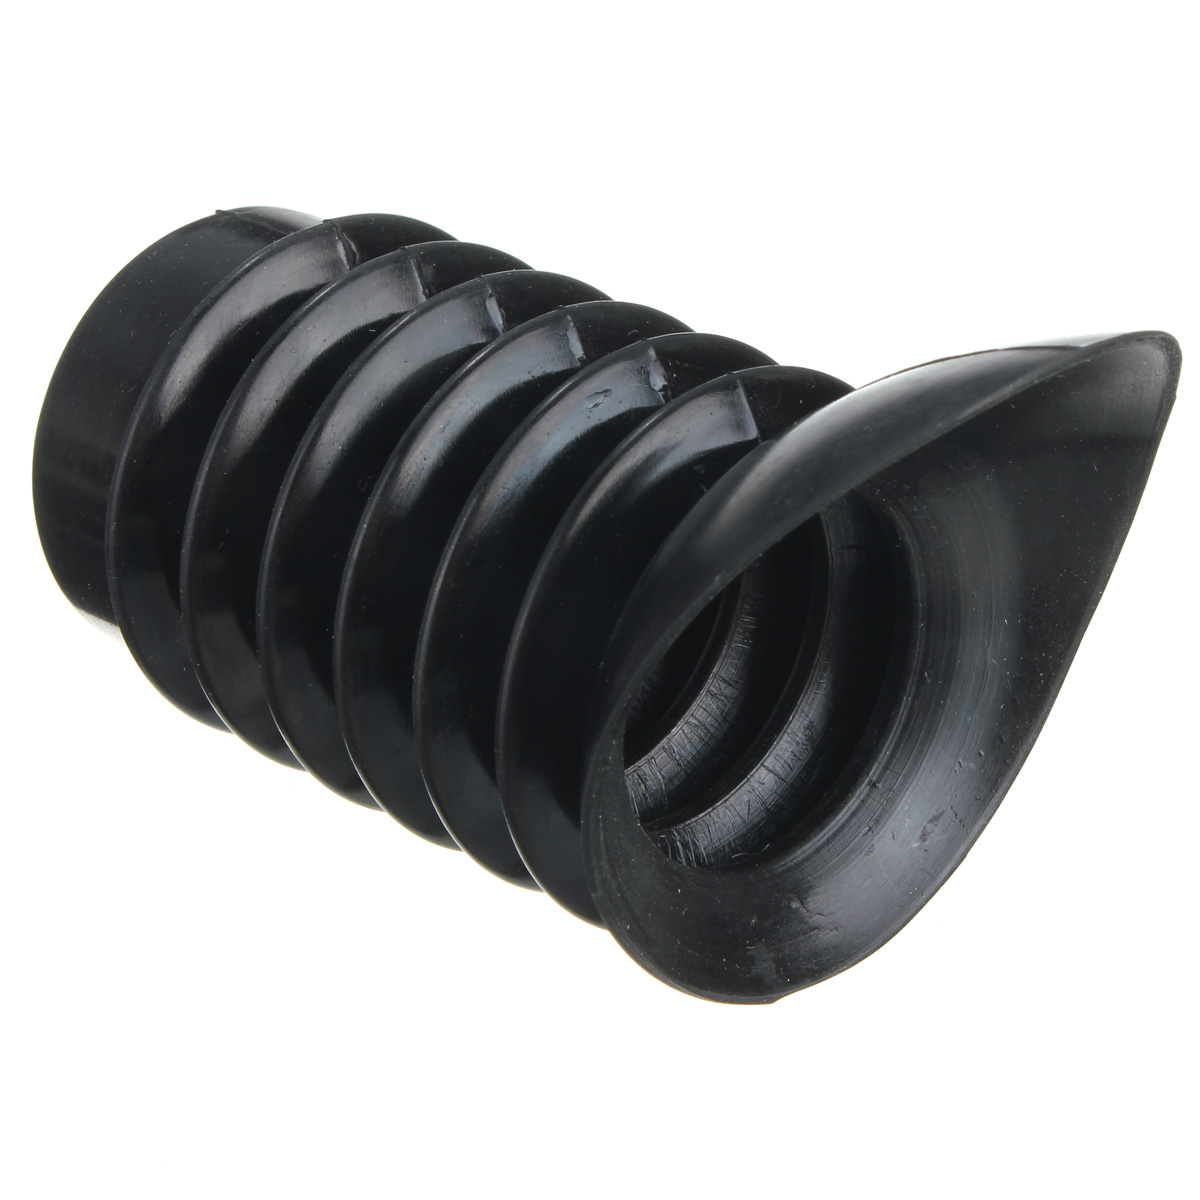 Hunting-38mm-Flexible-Scalability-Ocular-Soft-Rubber-Cover-Eye-Protector-Cover-For-Scope-Telescope-1181403-3